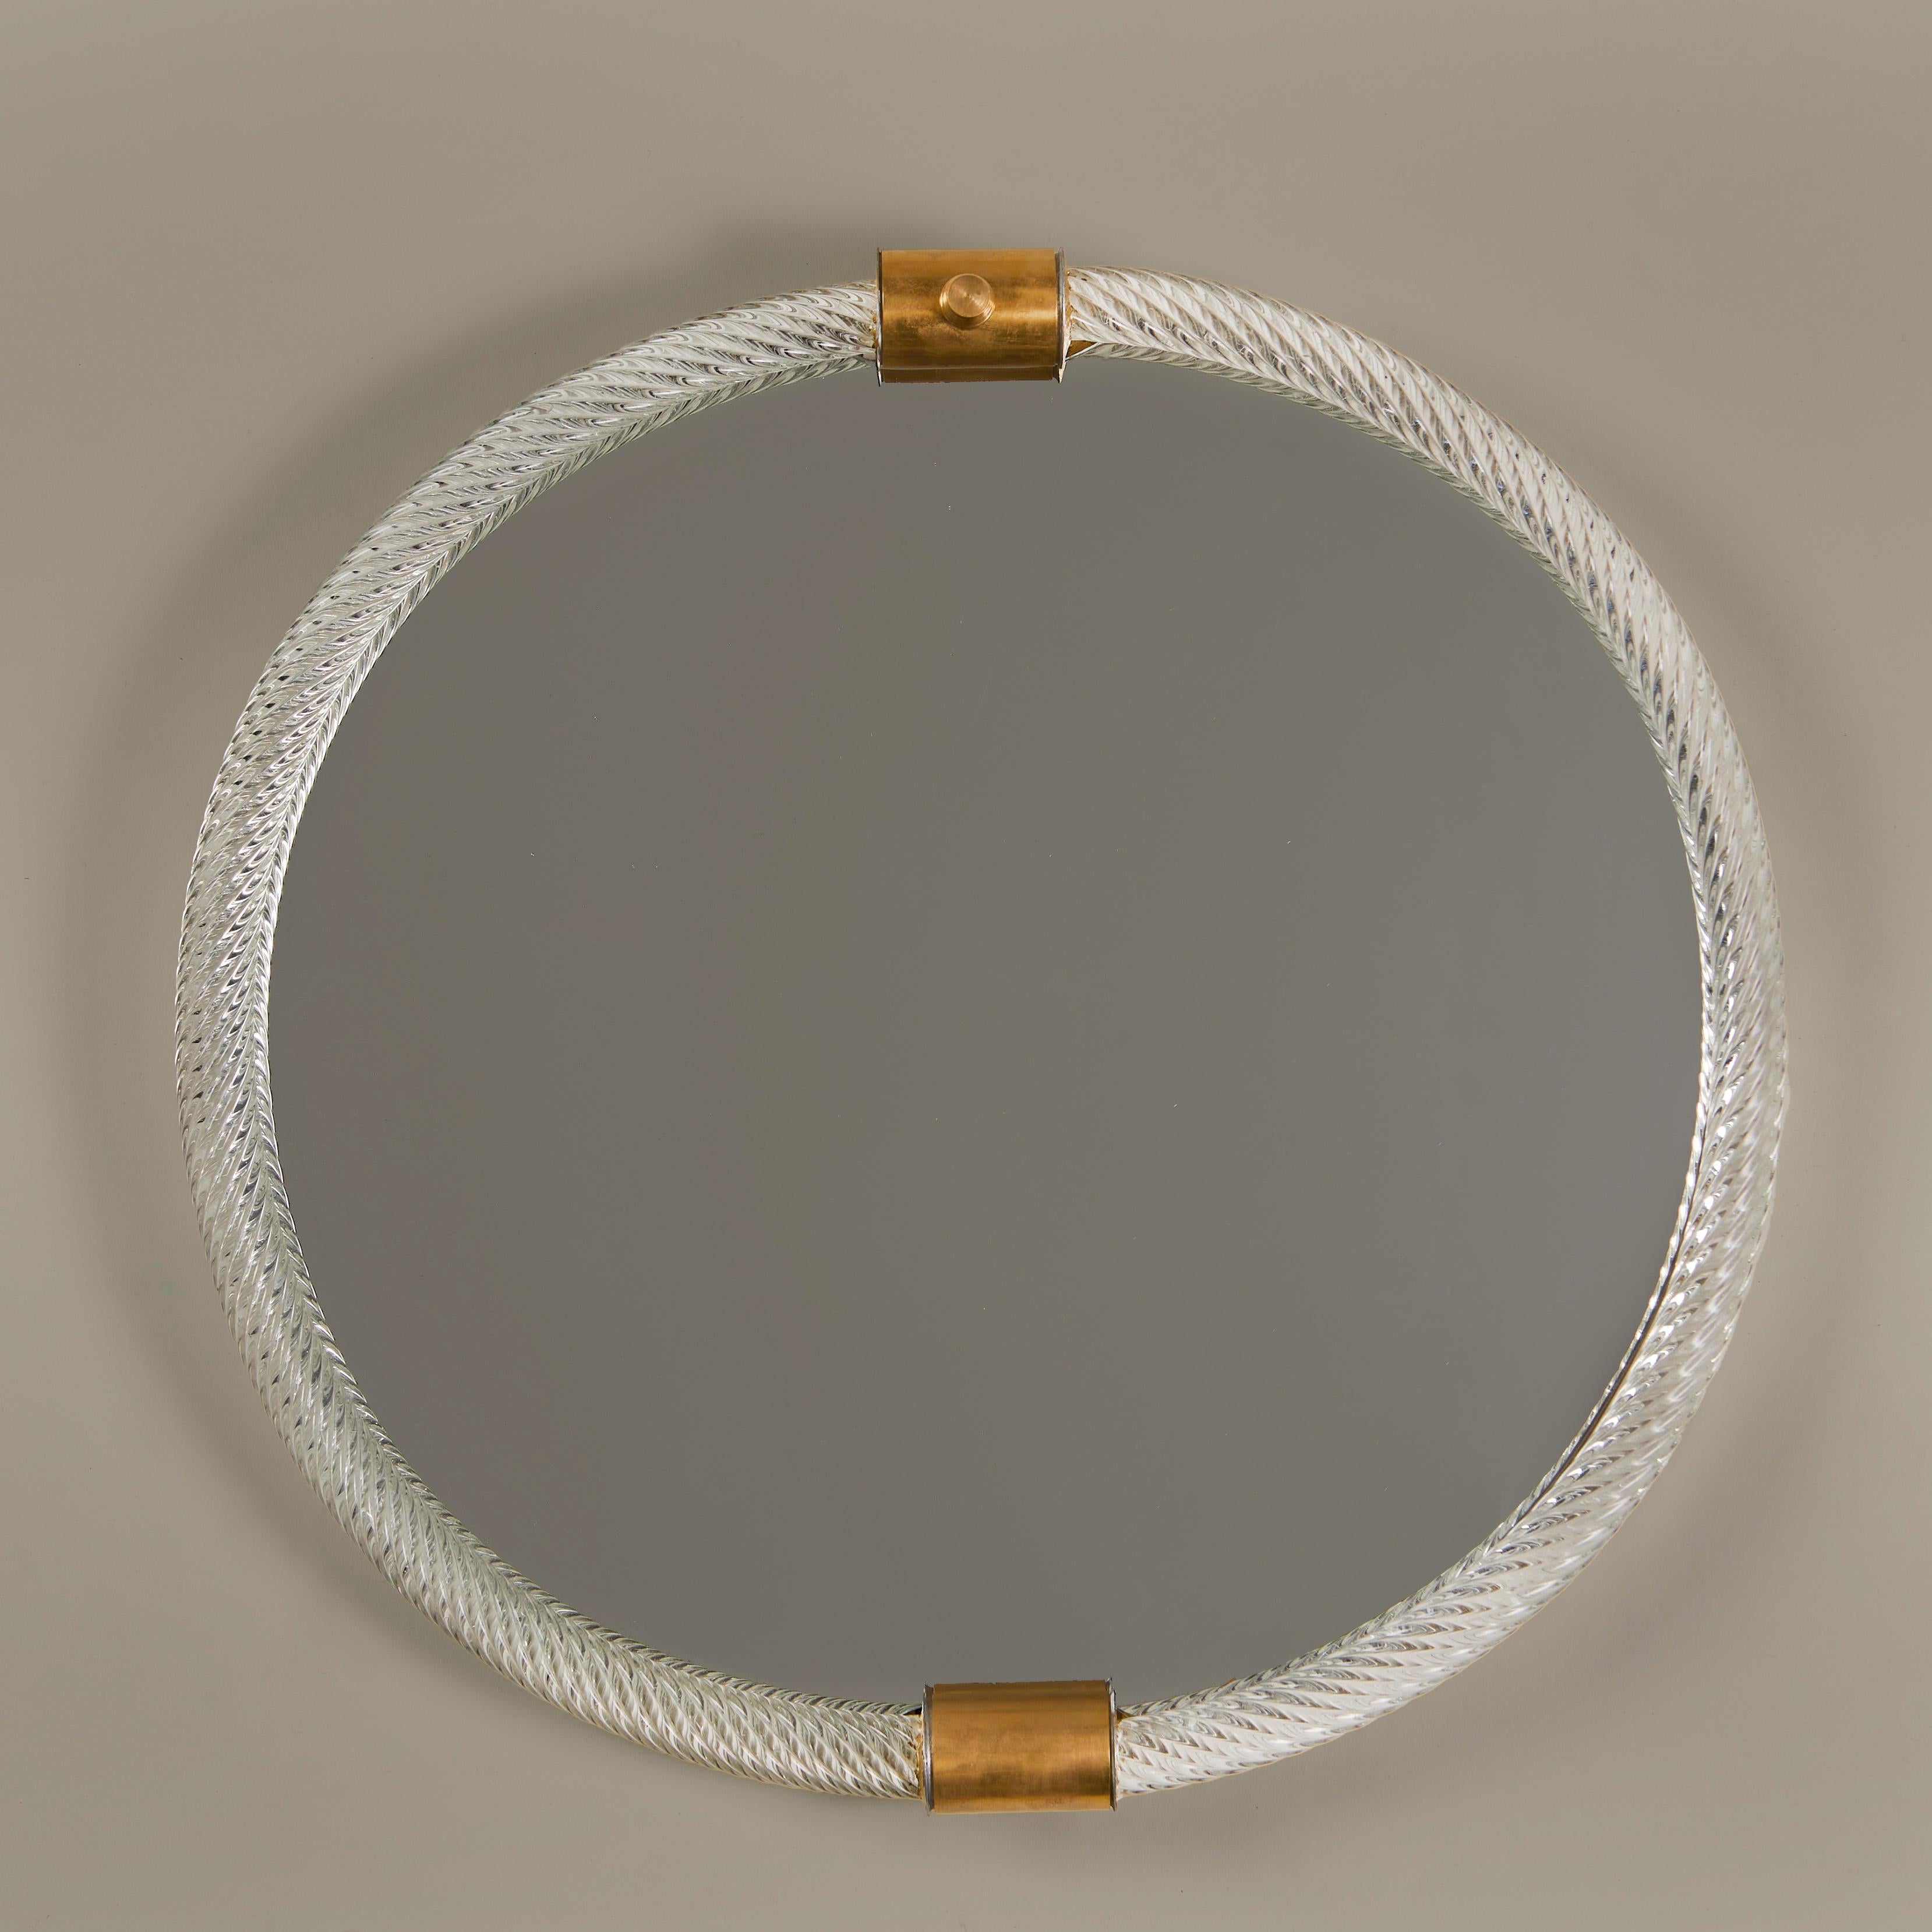 Elegant clear oval twisted glass wall mirror with two decorative brass clasps
